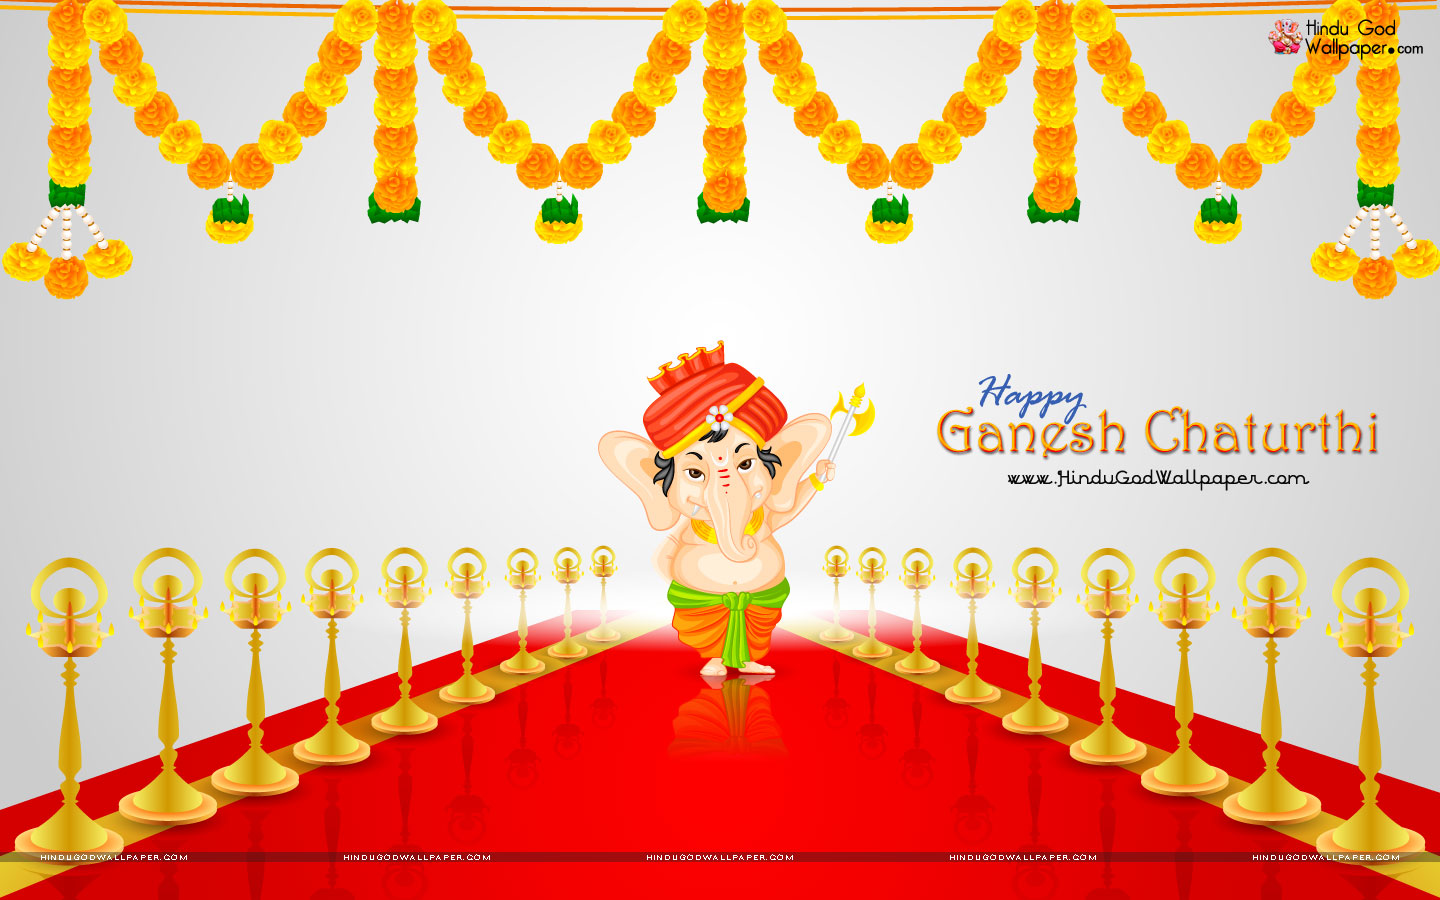 Ganesh Chaturthi Wishes Photos, Images & Wallpapers